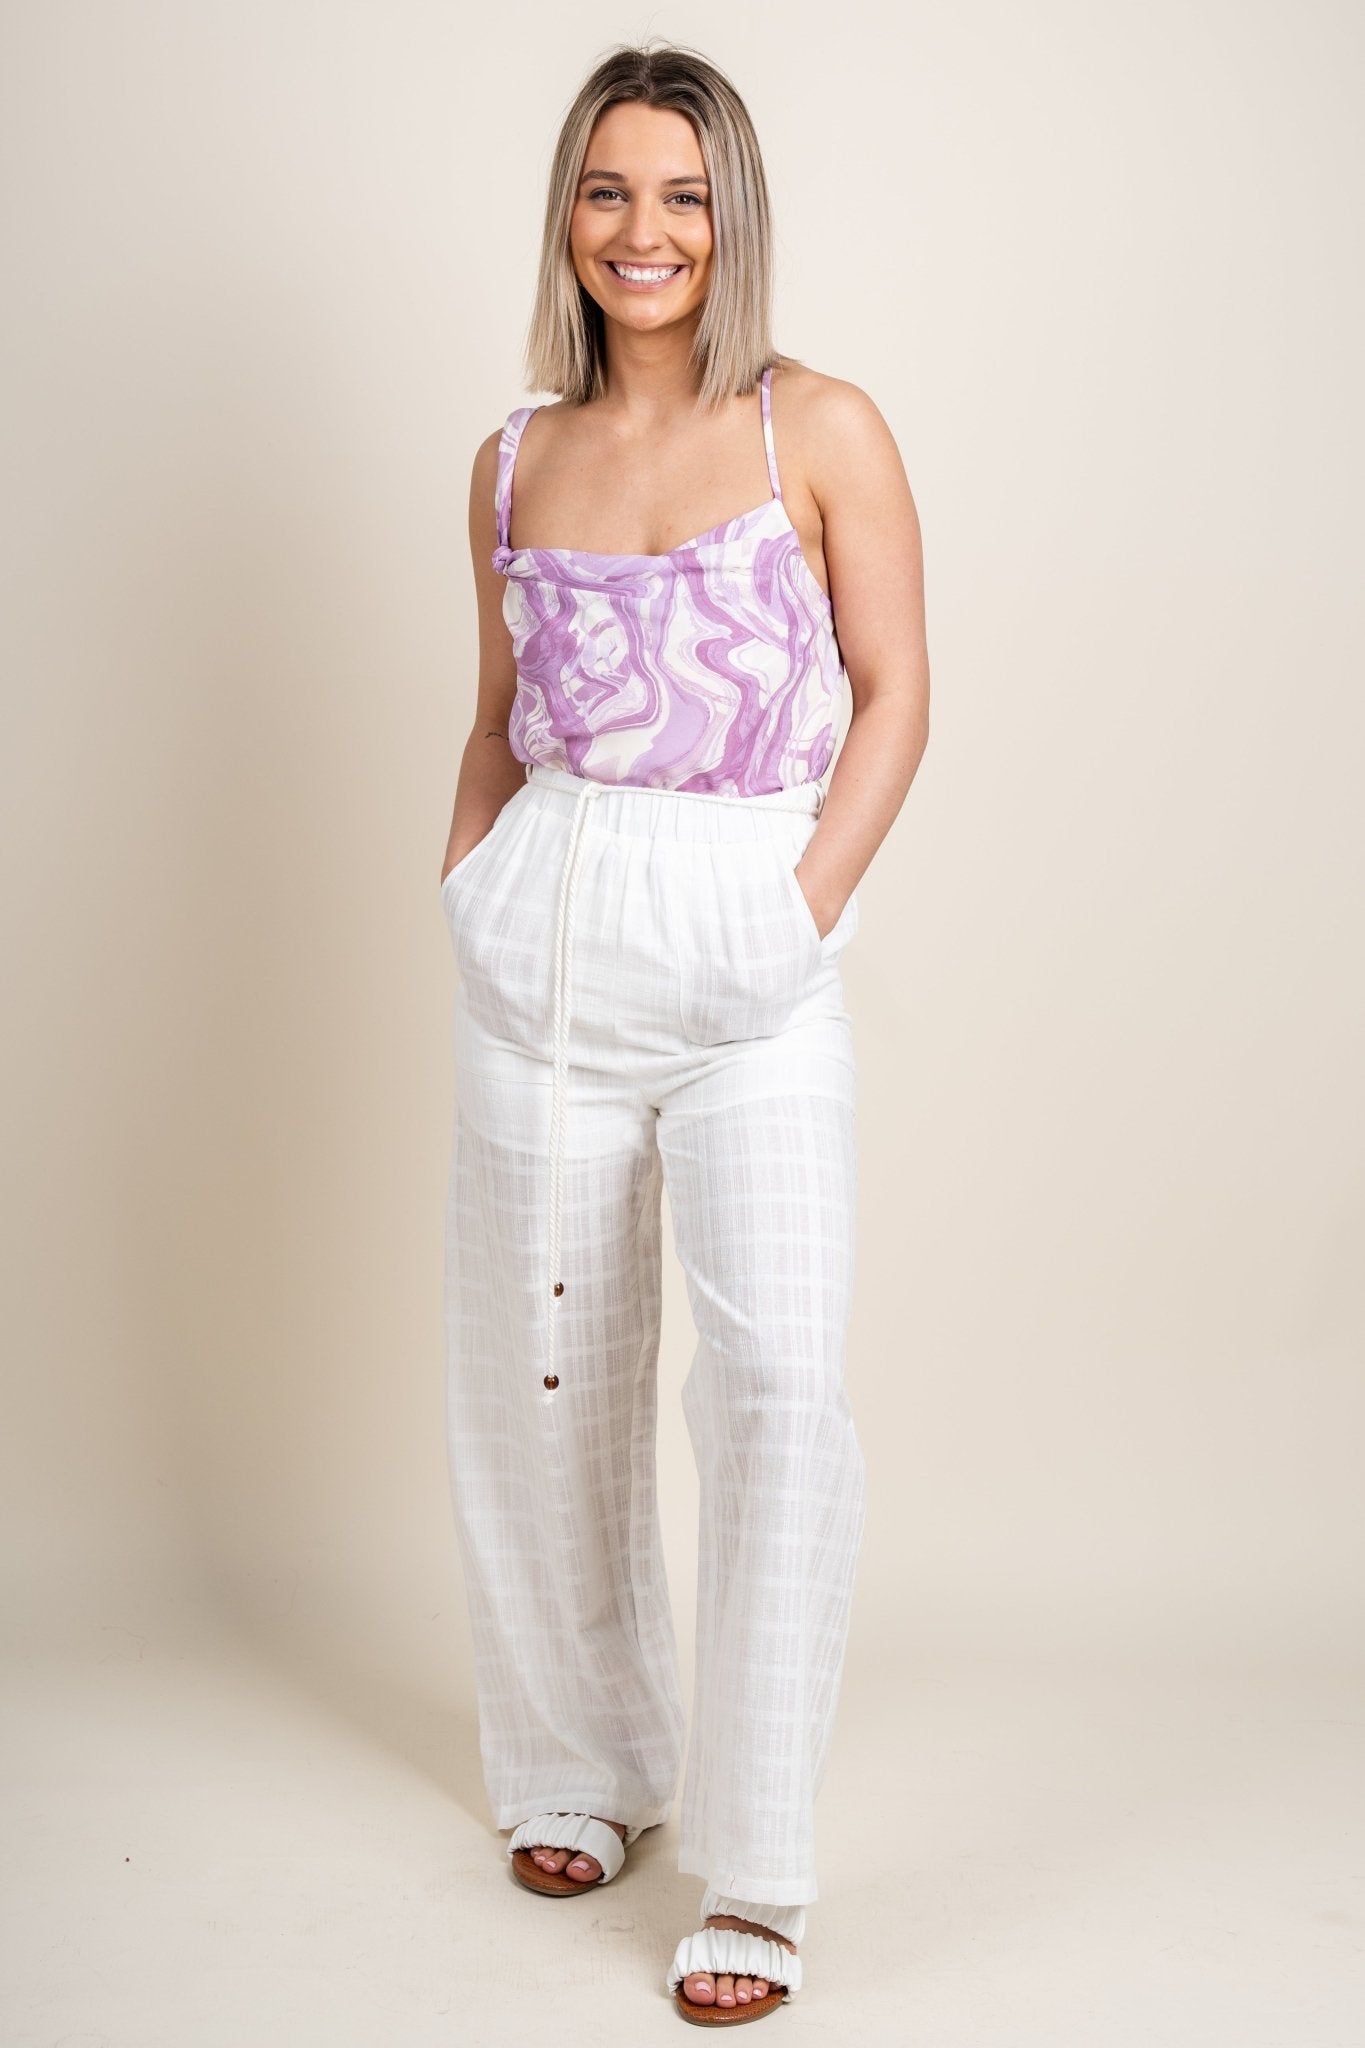 Linen tie waist pants off white - Stylish Pants - Trendy Staycation Outfits at Lush Fashion Lounge Boutique in Oklahoma City